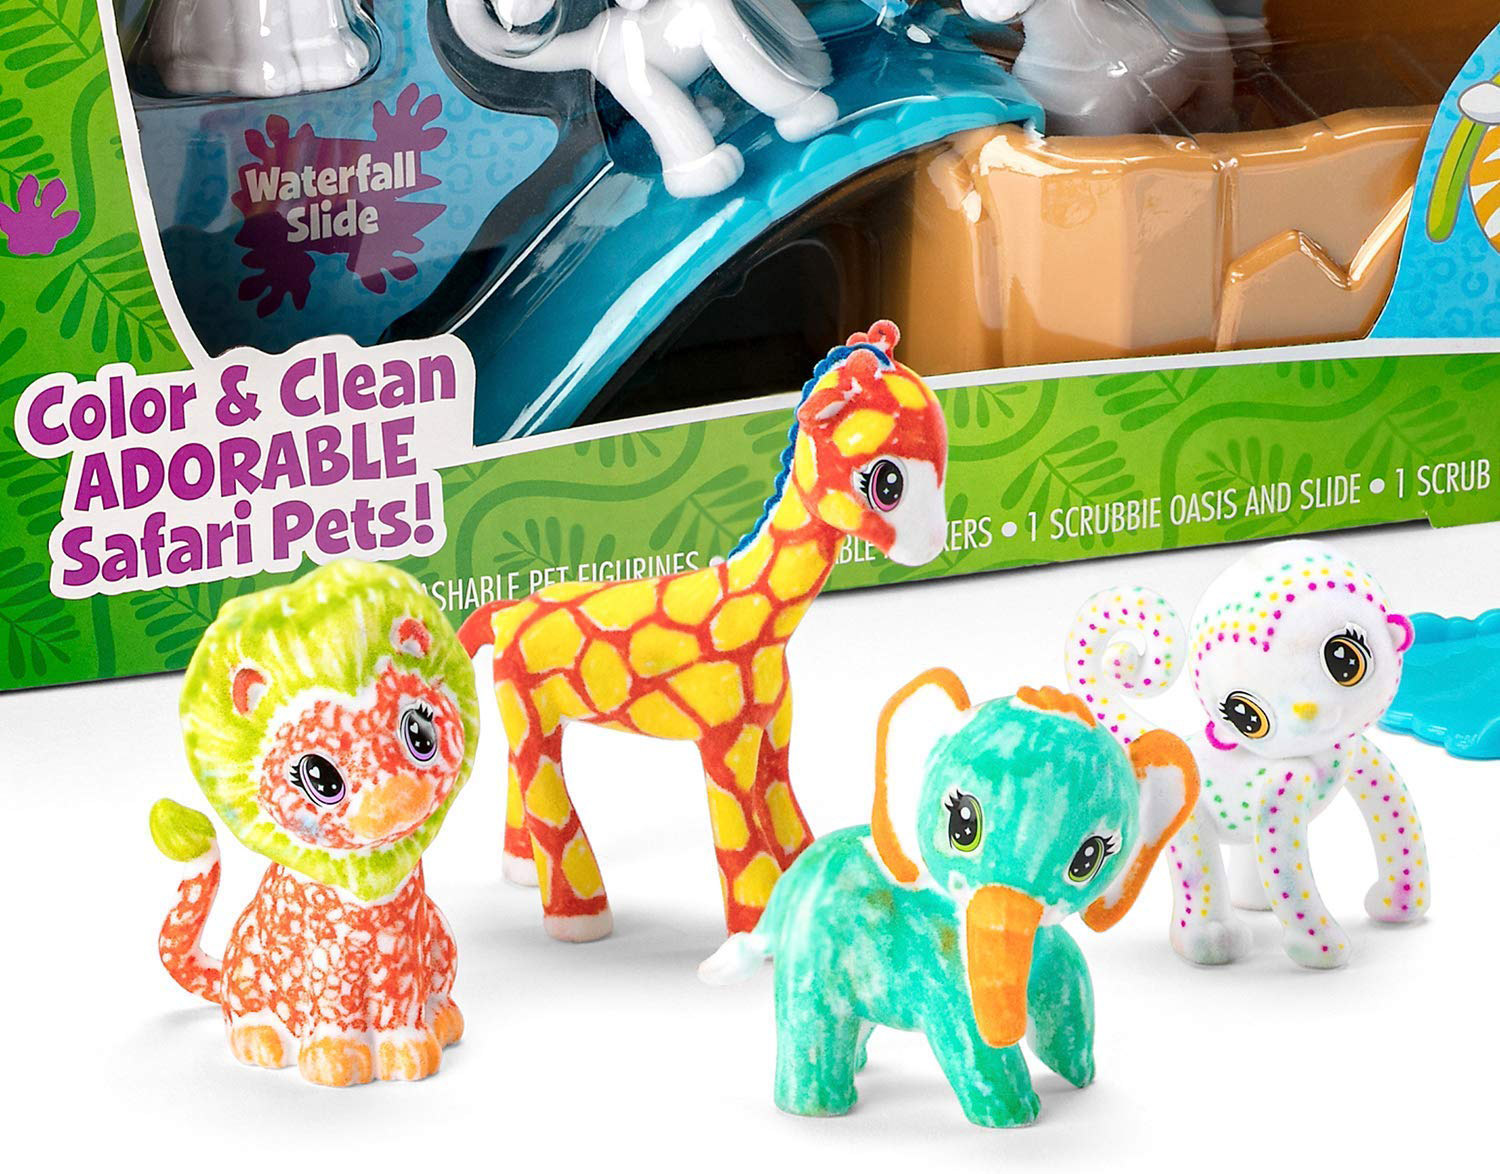 Go on a Jungle Journey with the Crayola Scribble Scrubbie Safari - The Toy  Insider